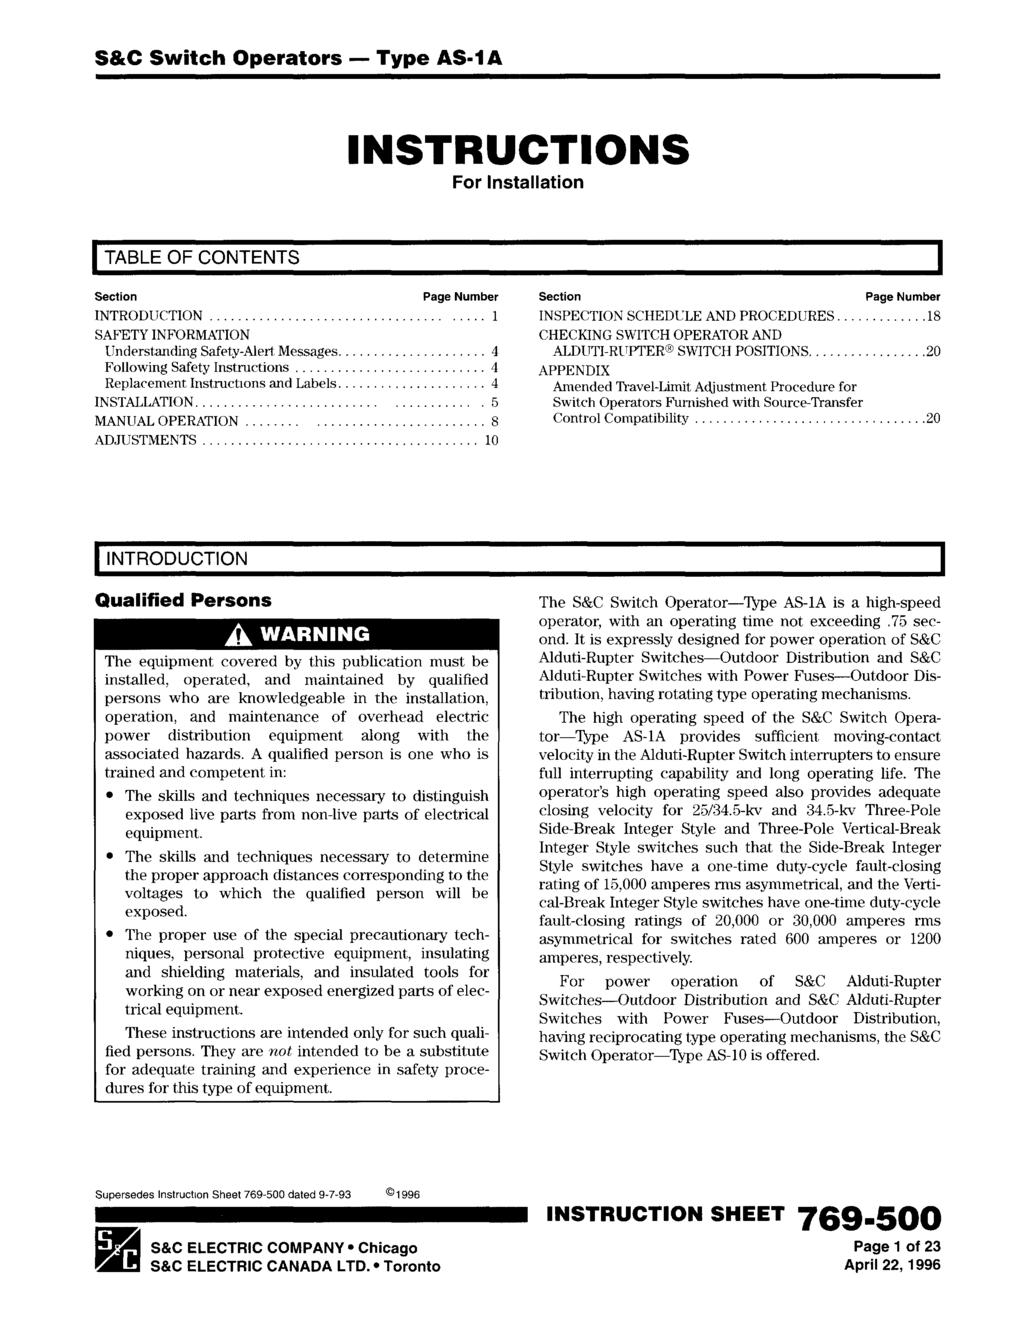 S&C Switch Operators - Type AS-1A For nstallation TABLE OF CONTENTS Section Page Number NTRODUCTON... 1 SAFETY NFORMATON LJnderst,anding Safety-Alert Messages.... 4 Following Safety nstructions.